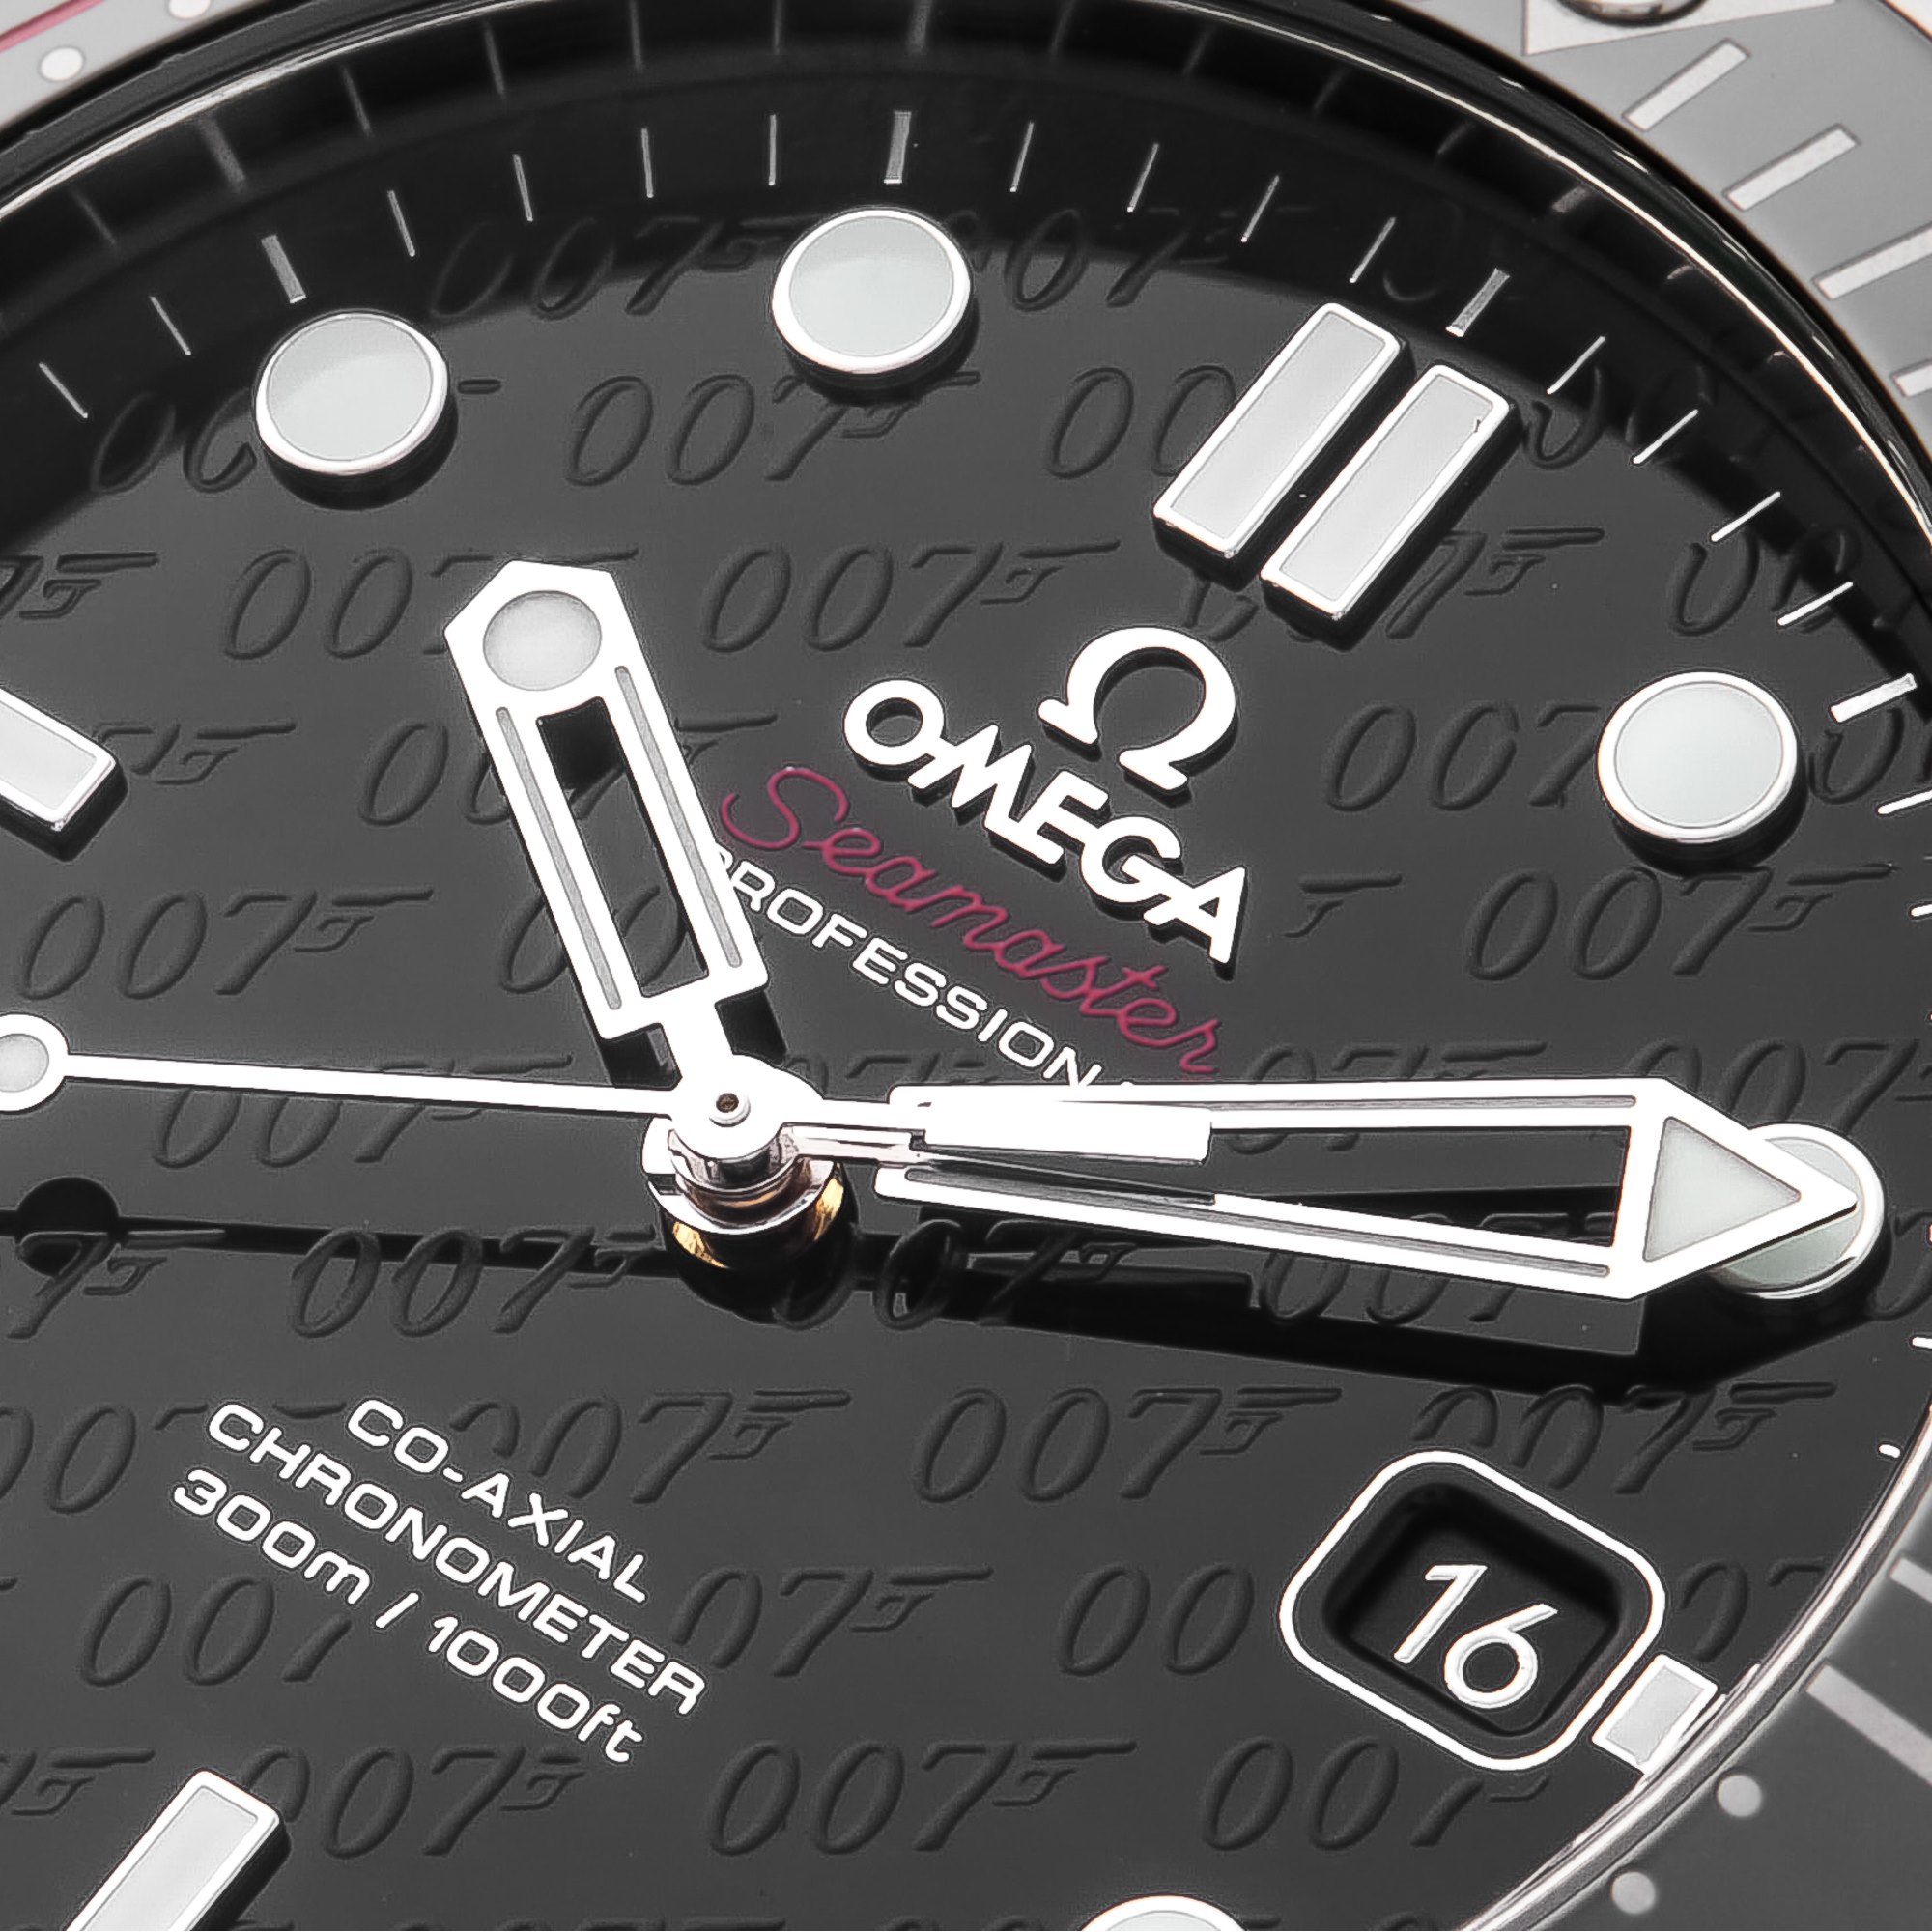 Omega Seamaster 300m James Bond Limited Edition to 11007 Pieces Roestvrij Staal 212.30.41.20.01.005